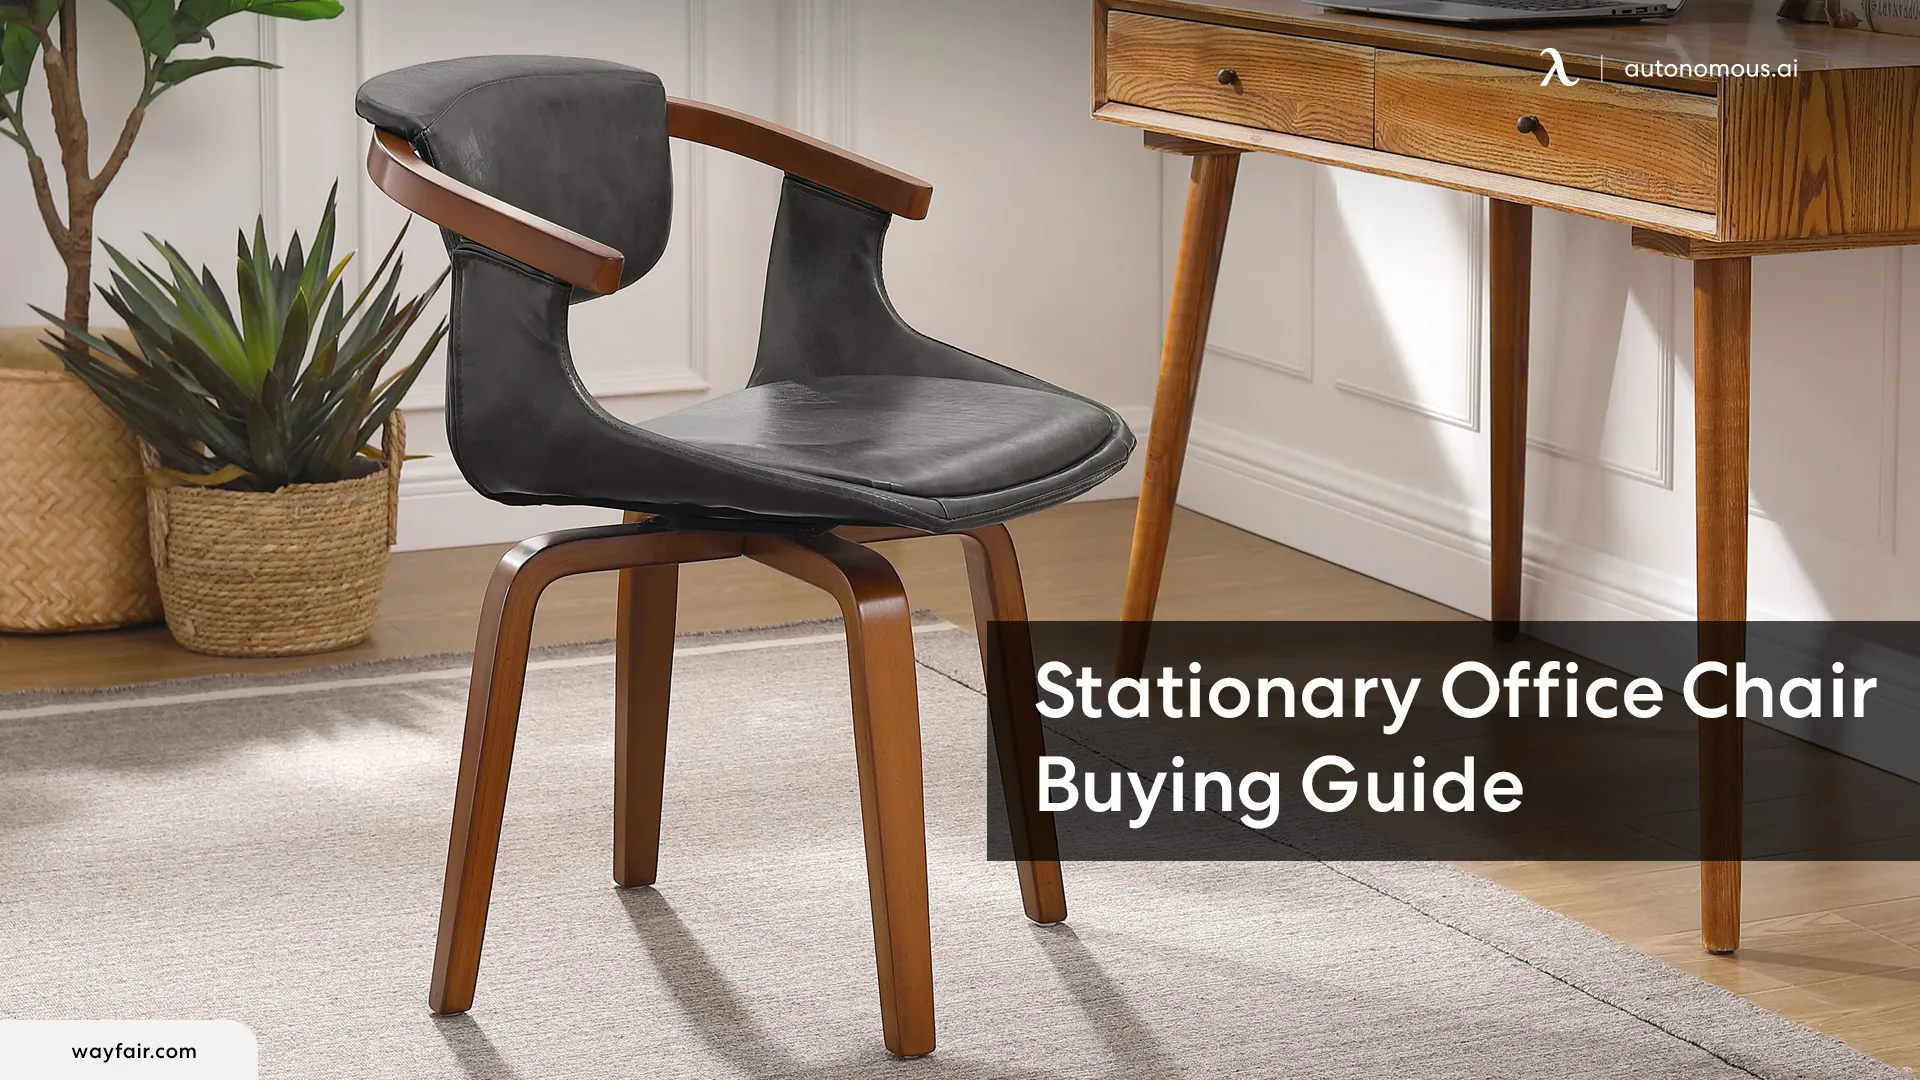 A Full Guide to Finding a Stationary Chair for Your Desk